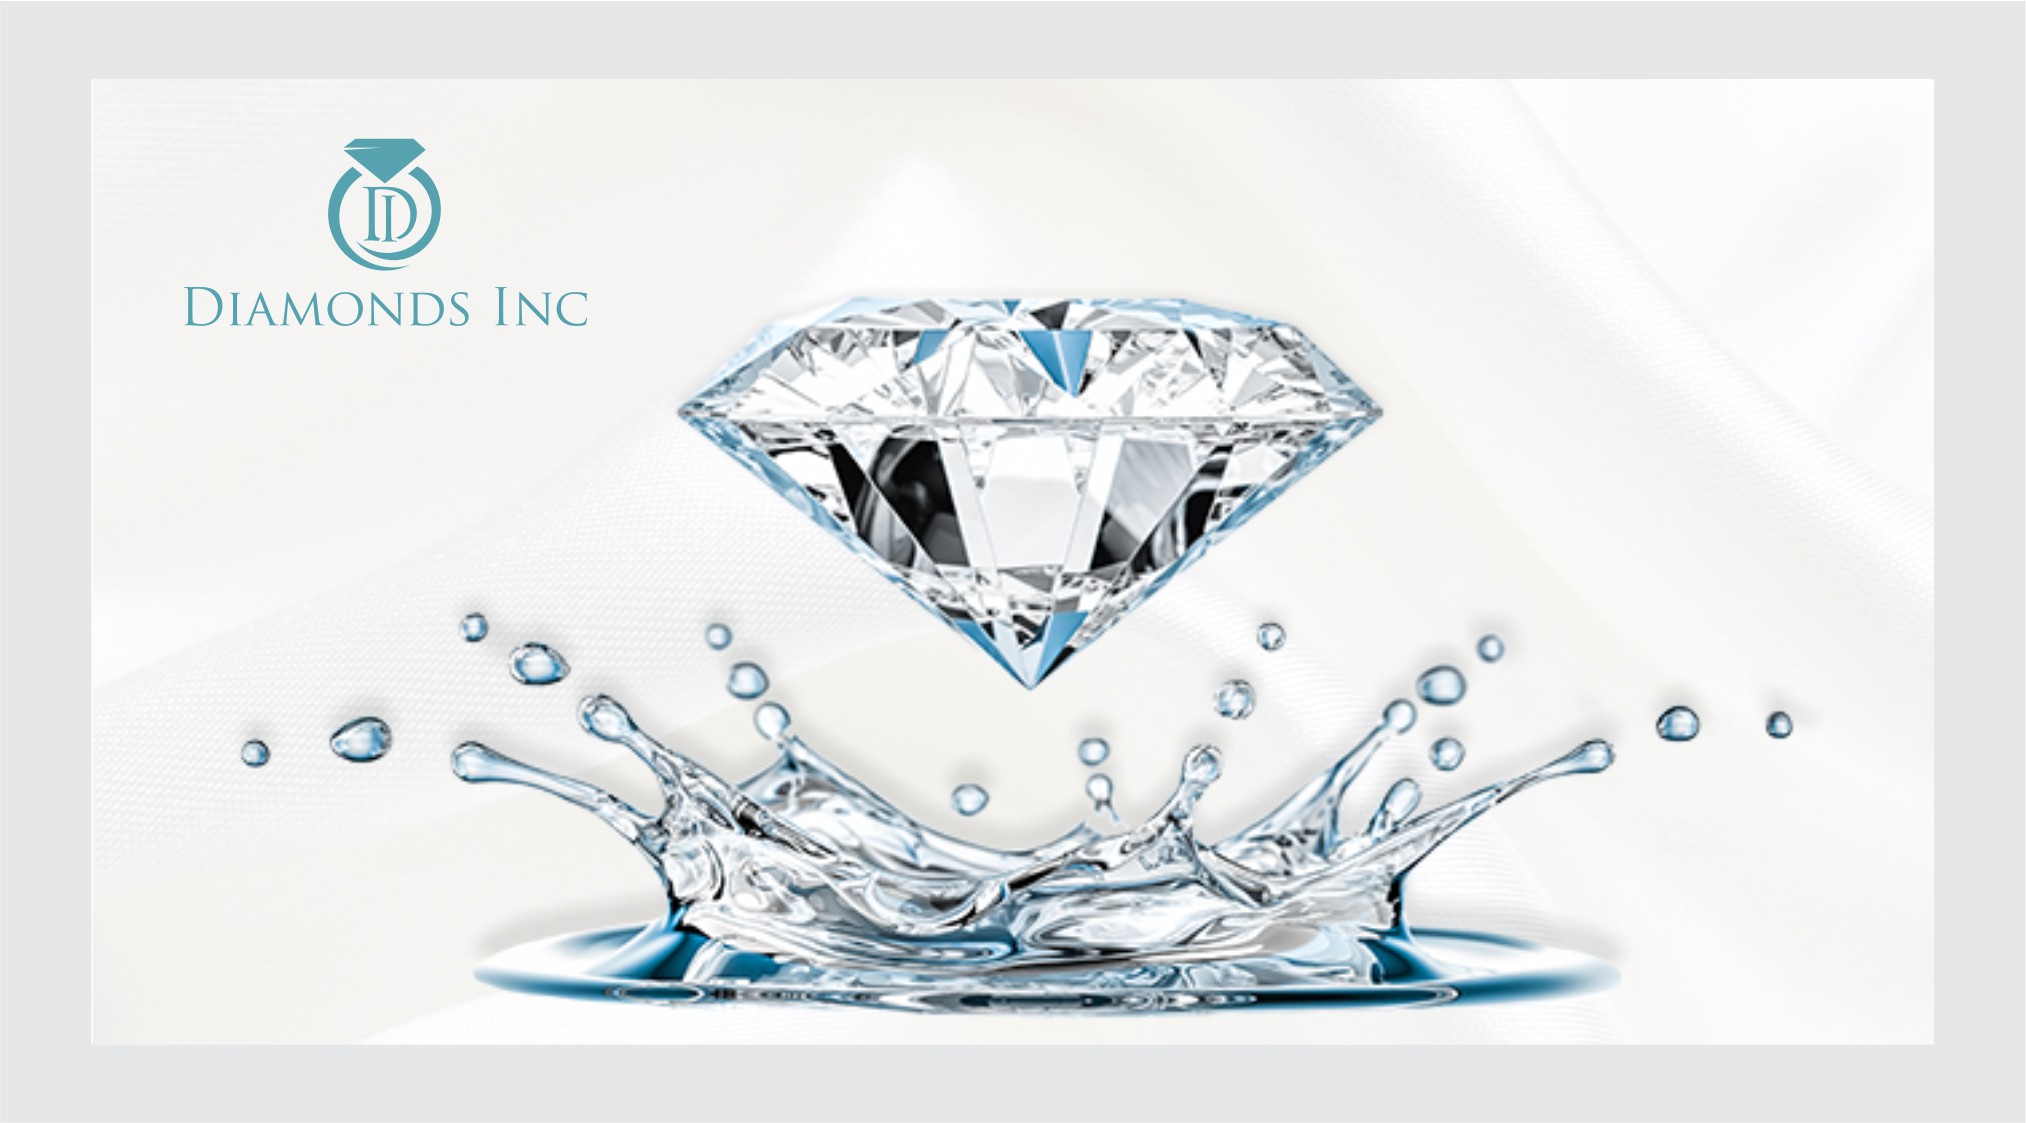 Diamonds And More About Diamonds – Is What You Will Get Here!!